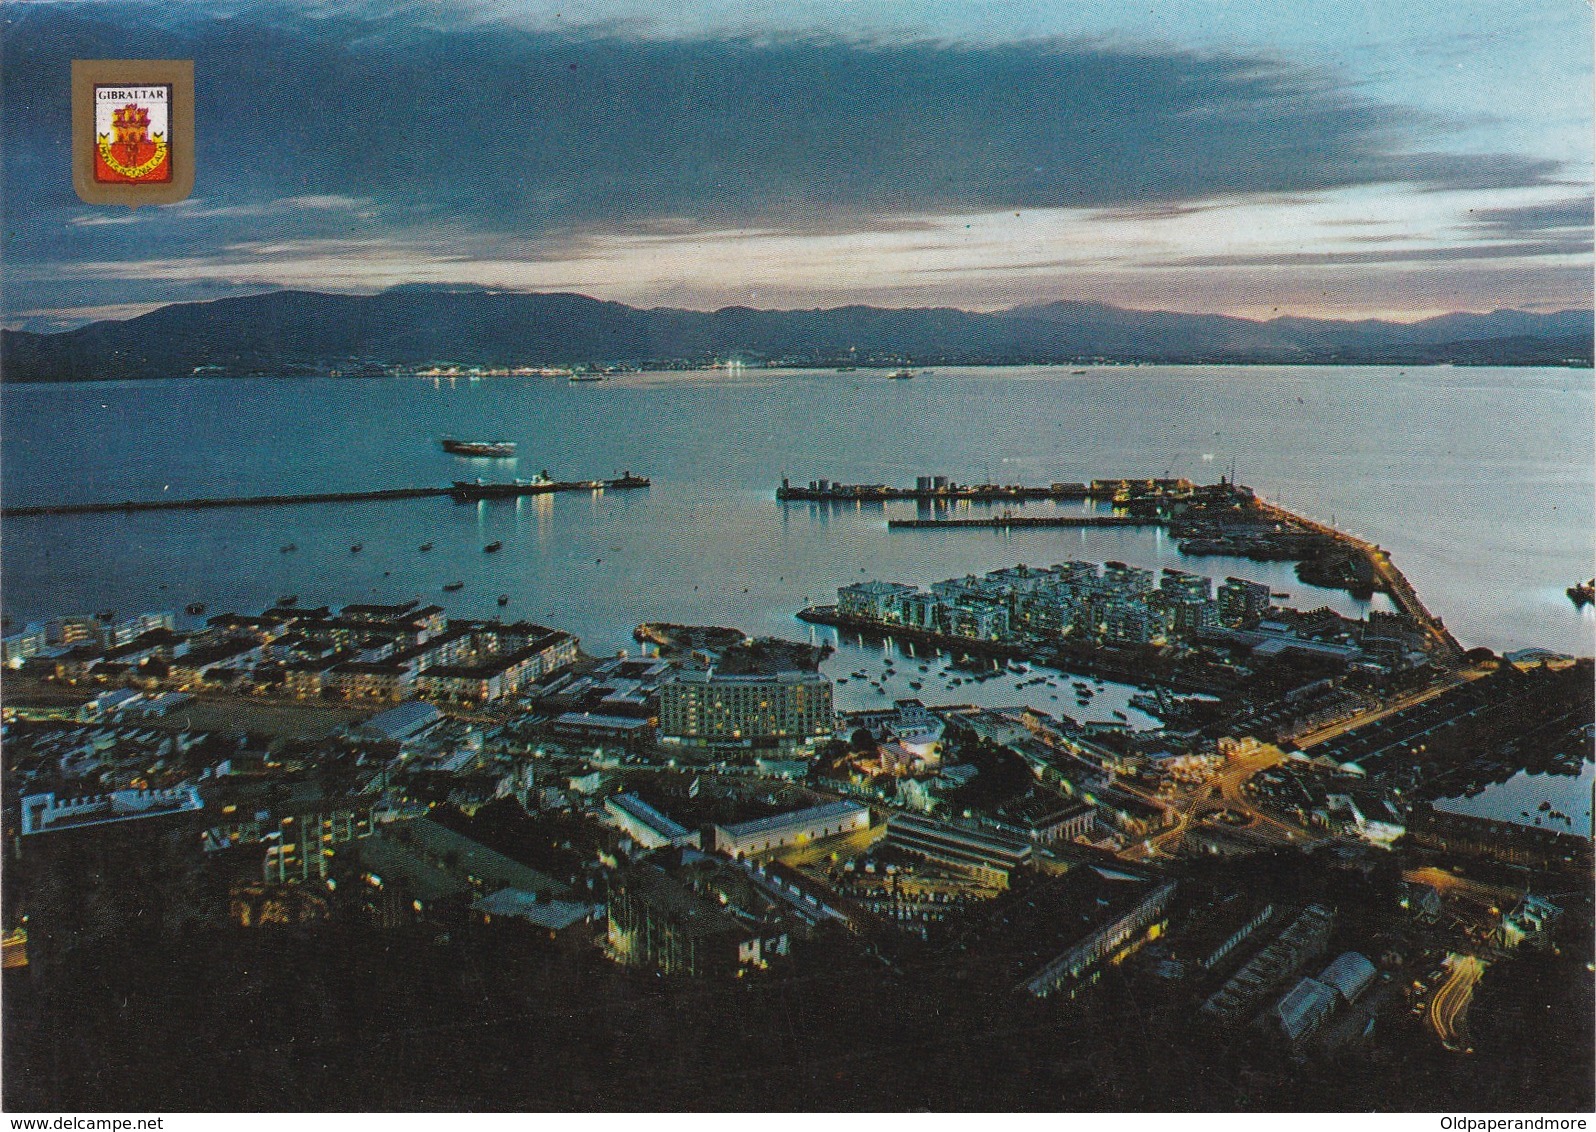 POSTCARD ENGLAND - GIBRALTAR - NIGHT VIEW OF TOWN AND HARBOUR - Gibraltar